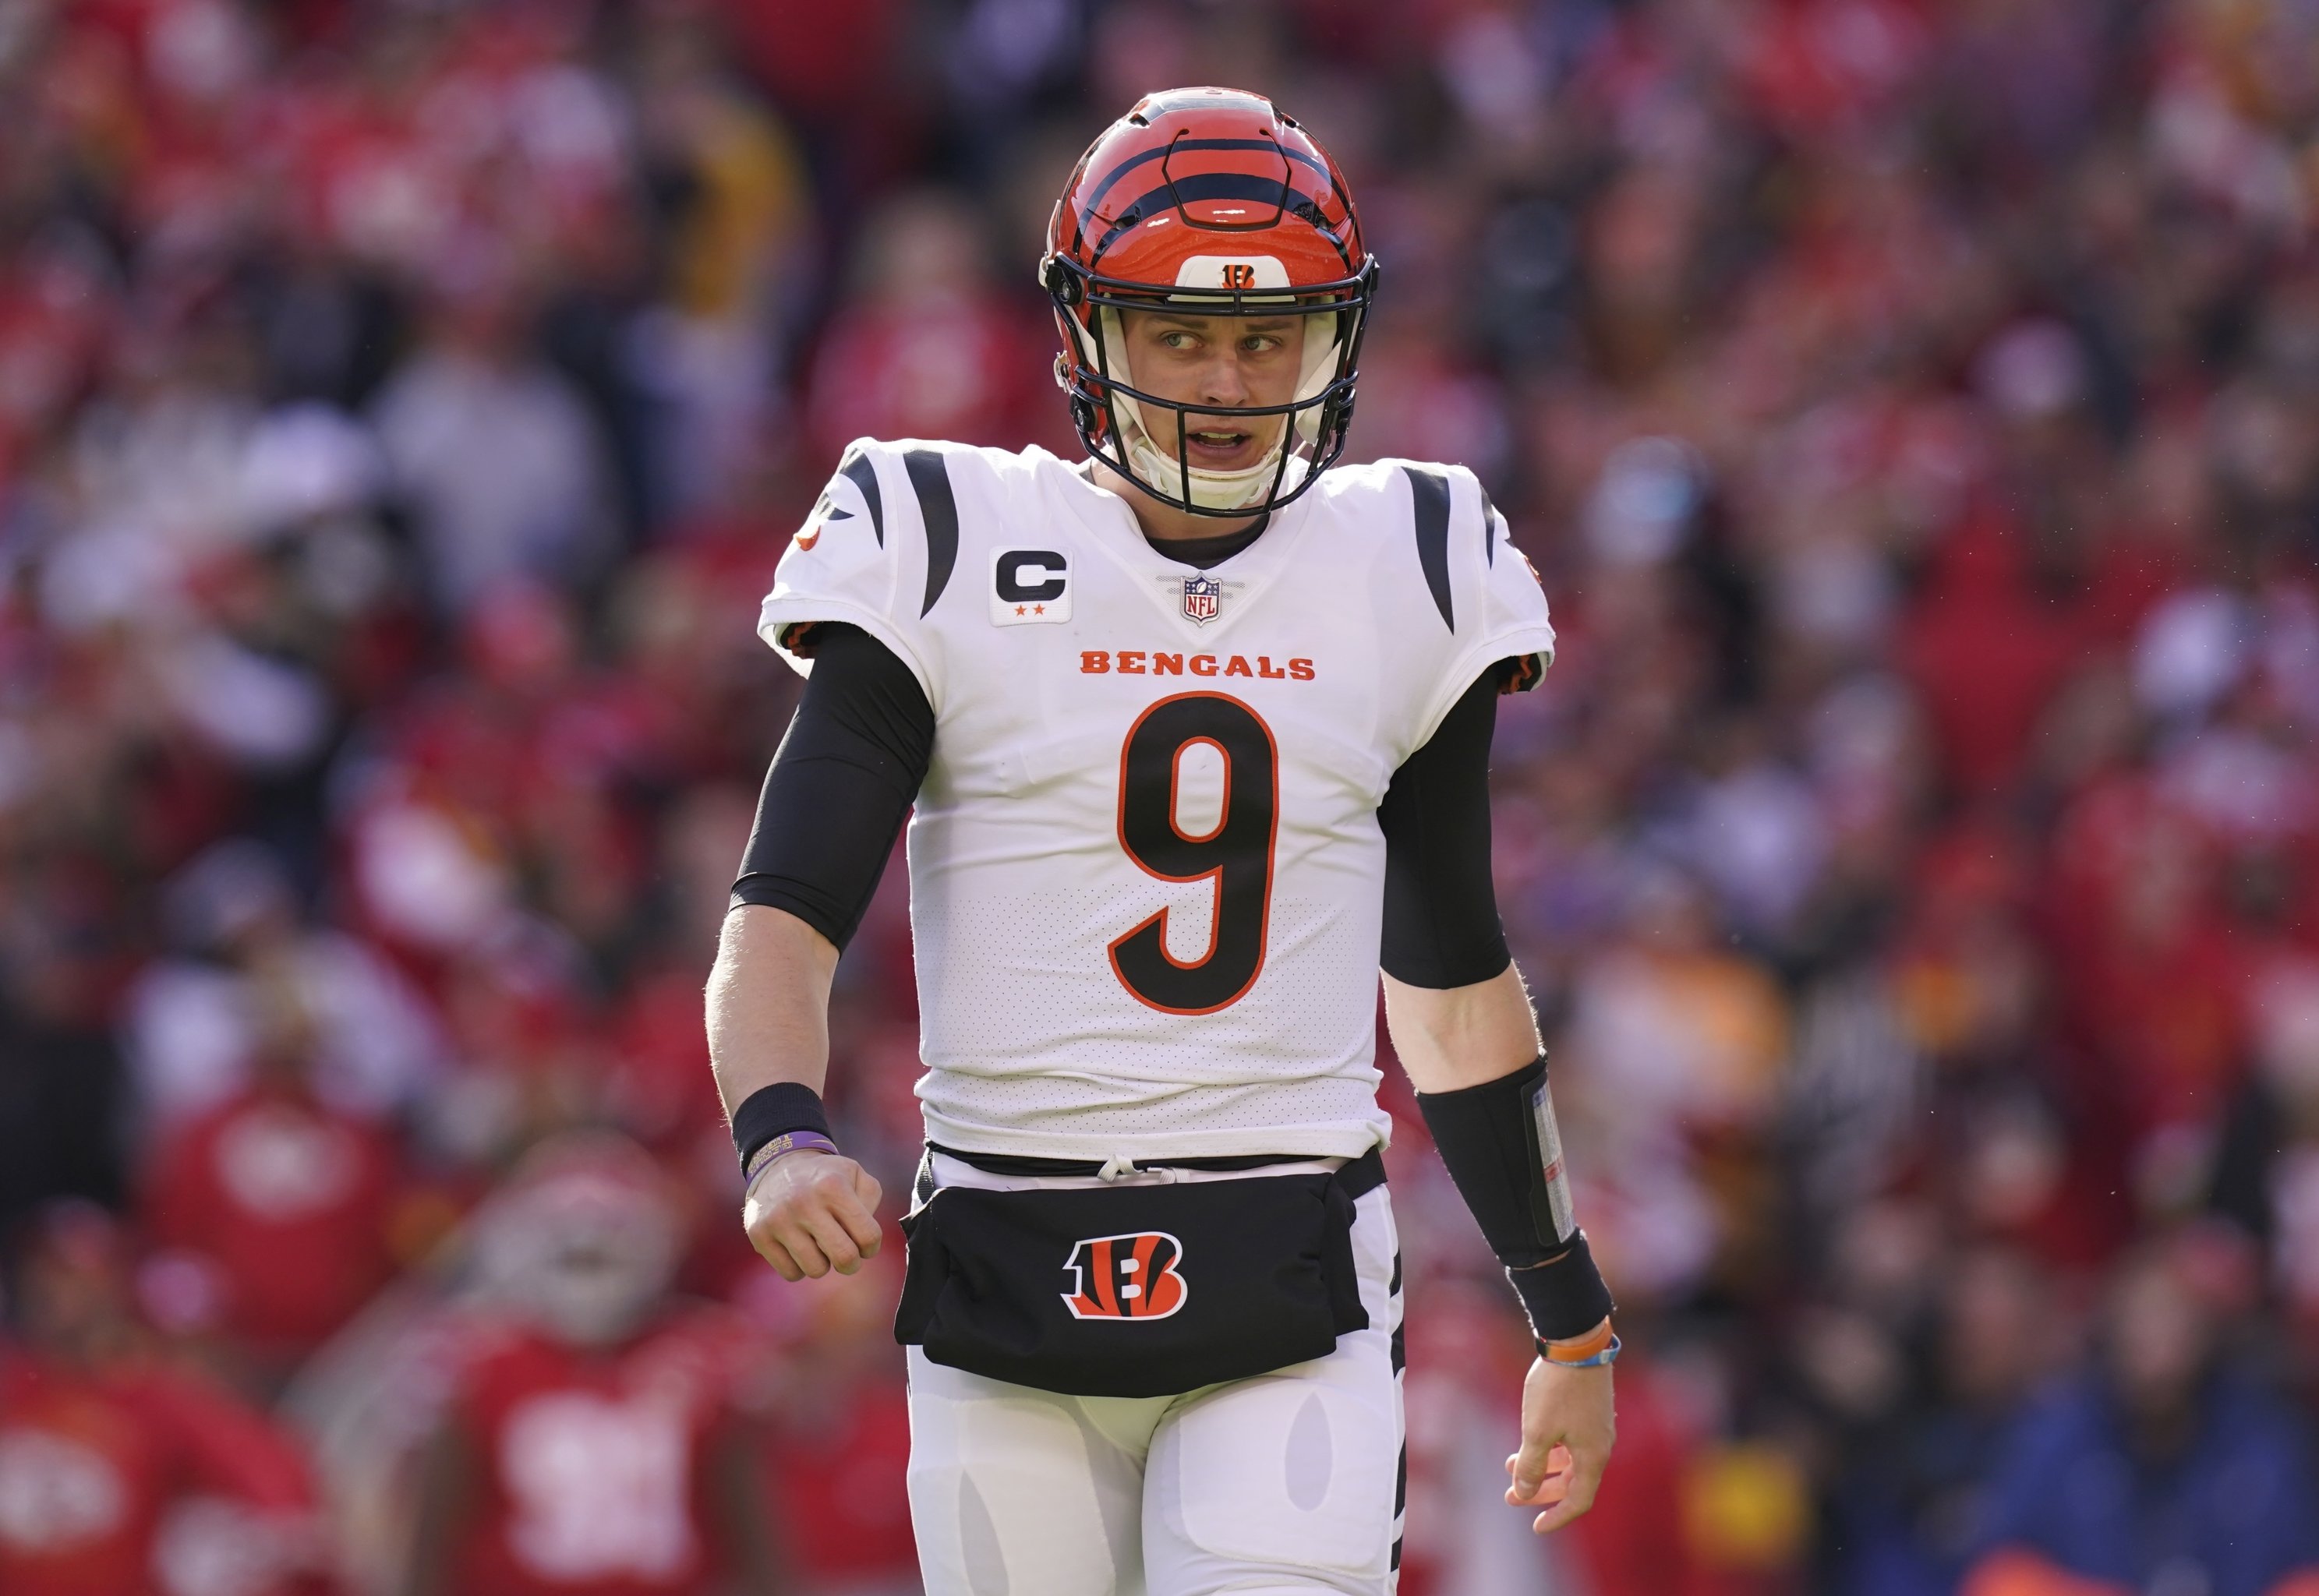 Super Bowl 2022 Preview: Who will win, Bengals or Rams? - Dawgs By Nature